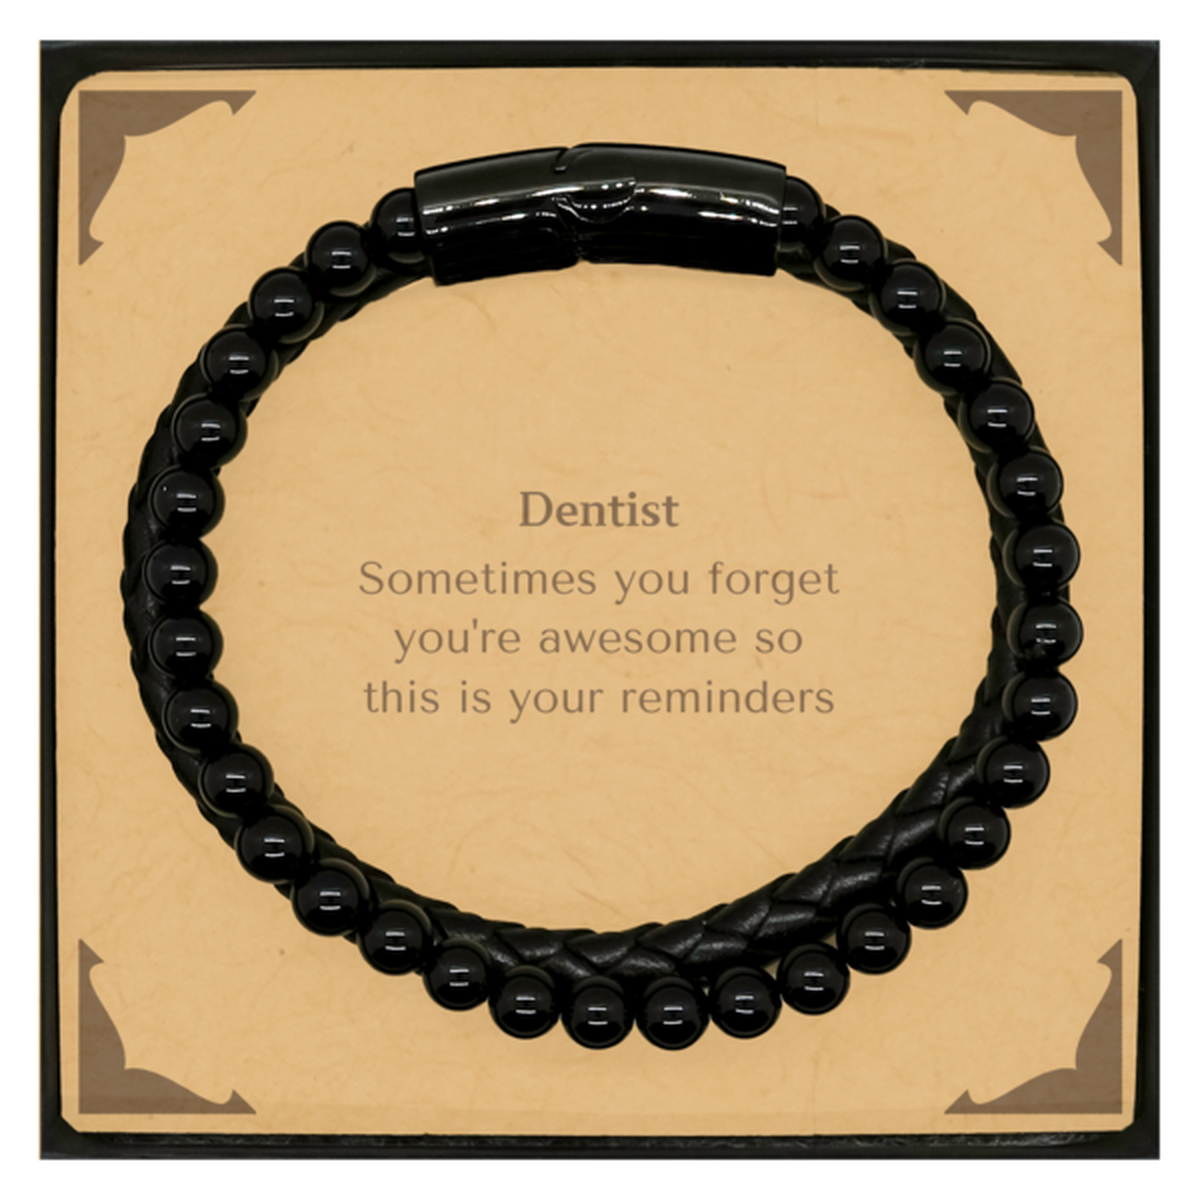 Sentimental Dentist Stone Leather Bracelets, Dentist Sometimes you forget you're awesome so this is your reminders, Graduation Christmas Birthday Gifts for Dentist, Men, Women, Coworkers